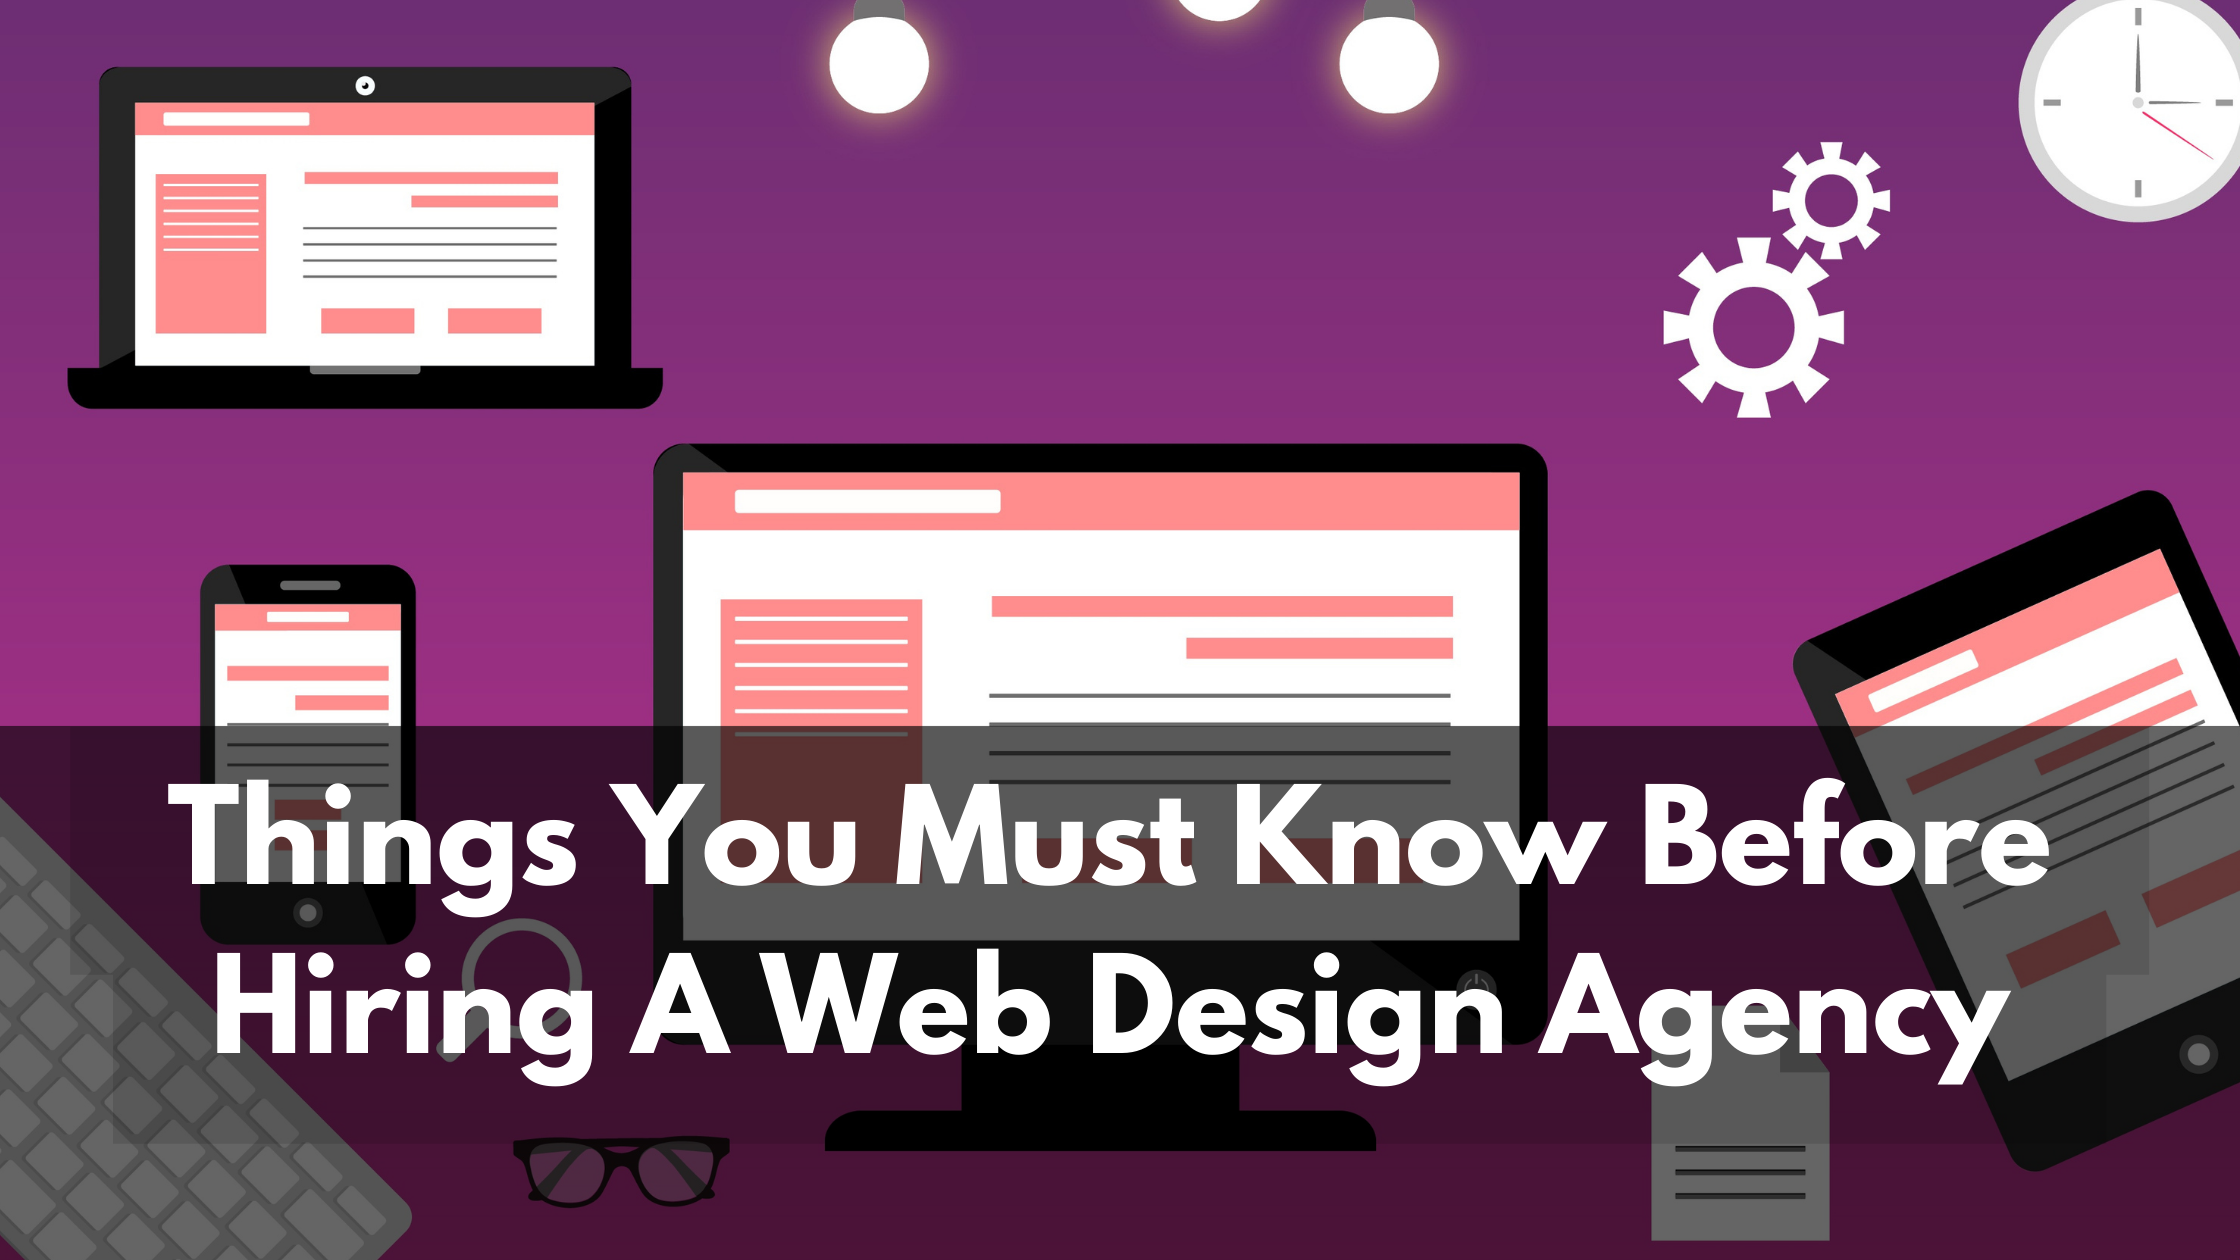 Things You Must Know Before Hiring A Web Design Agency